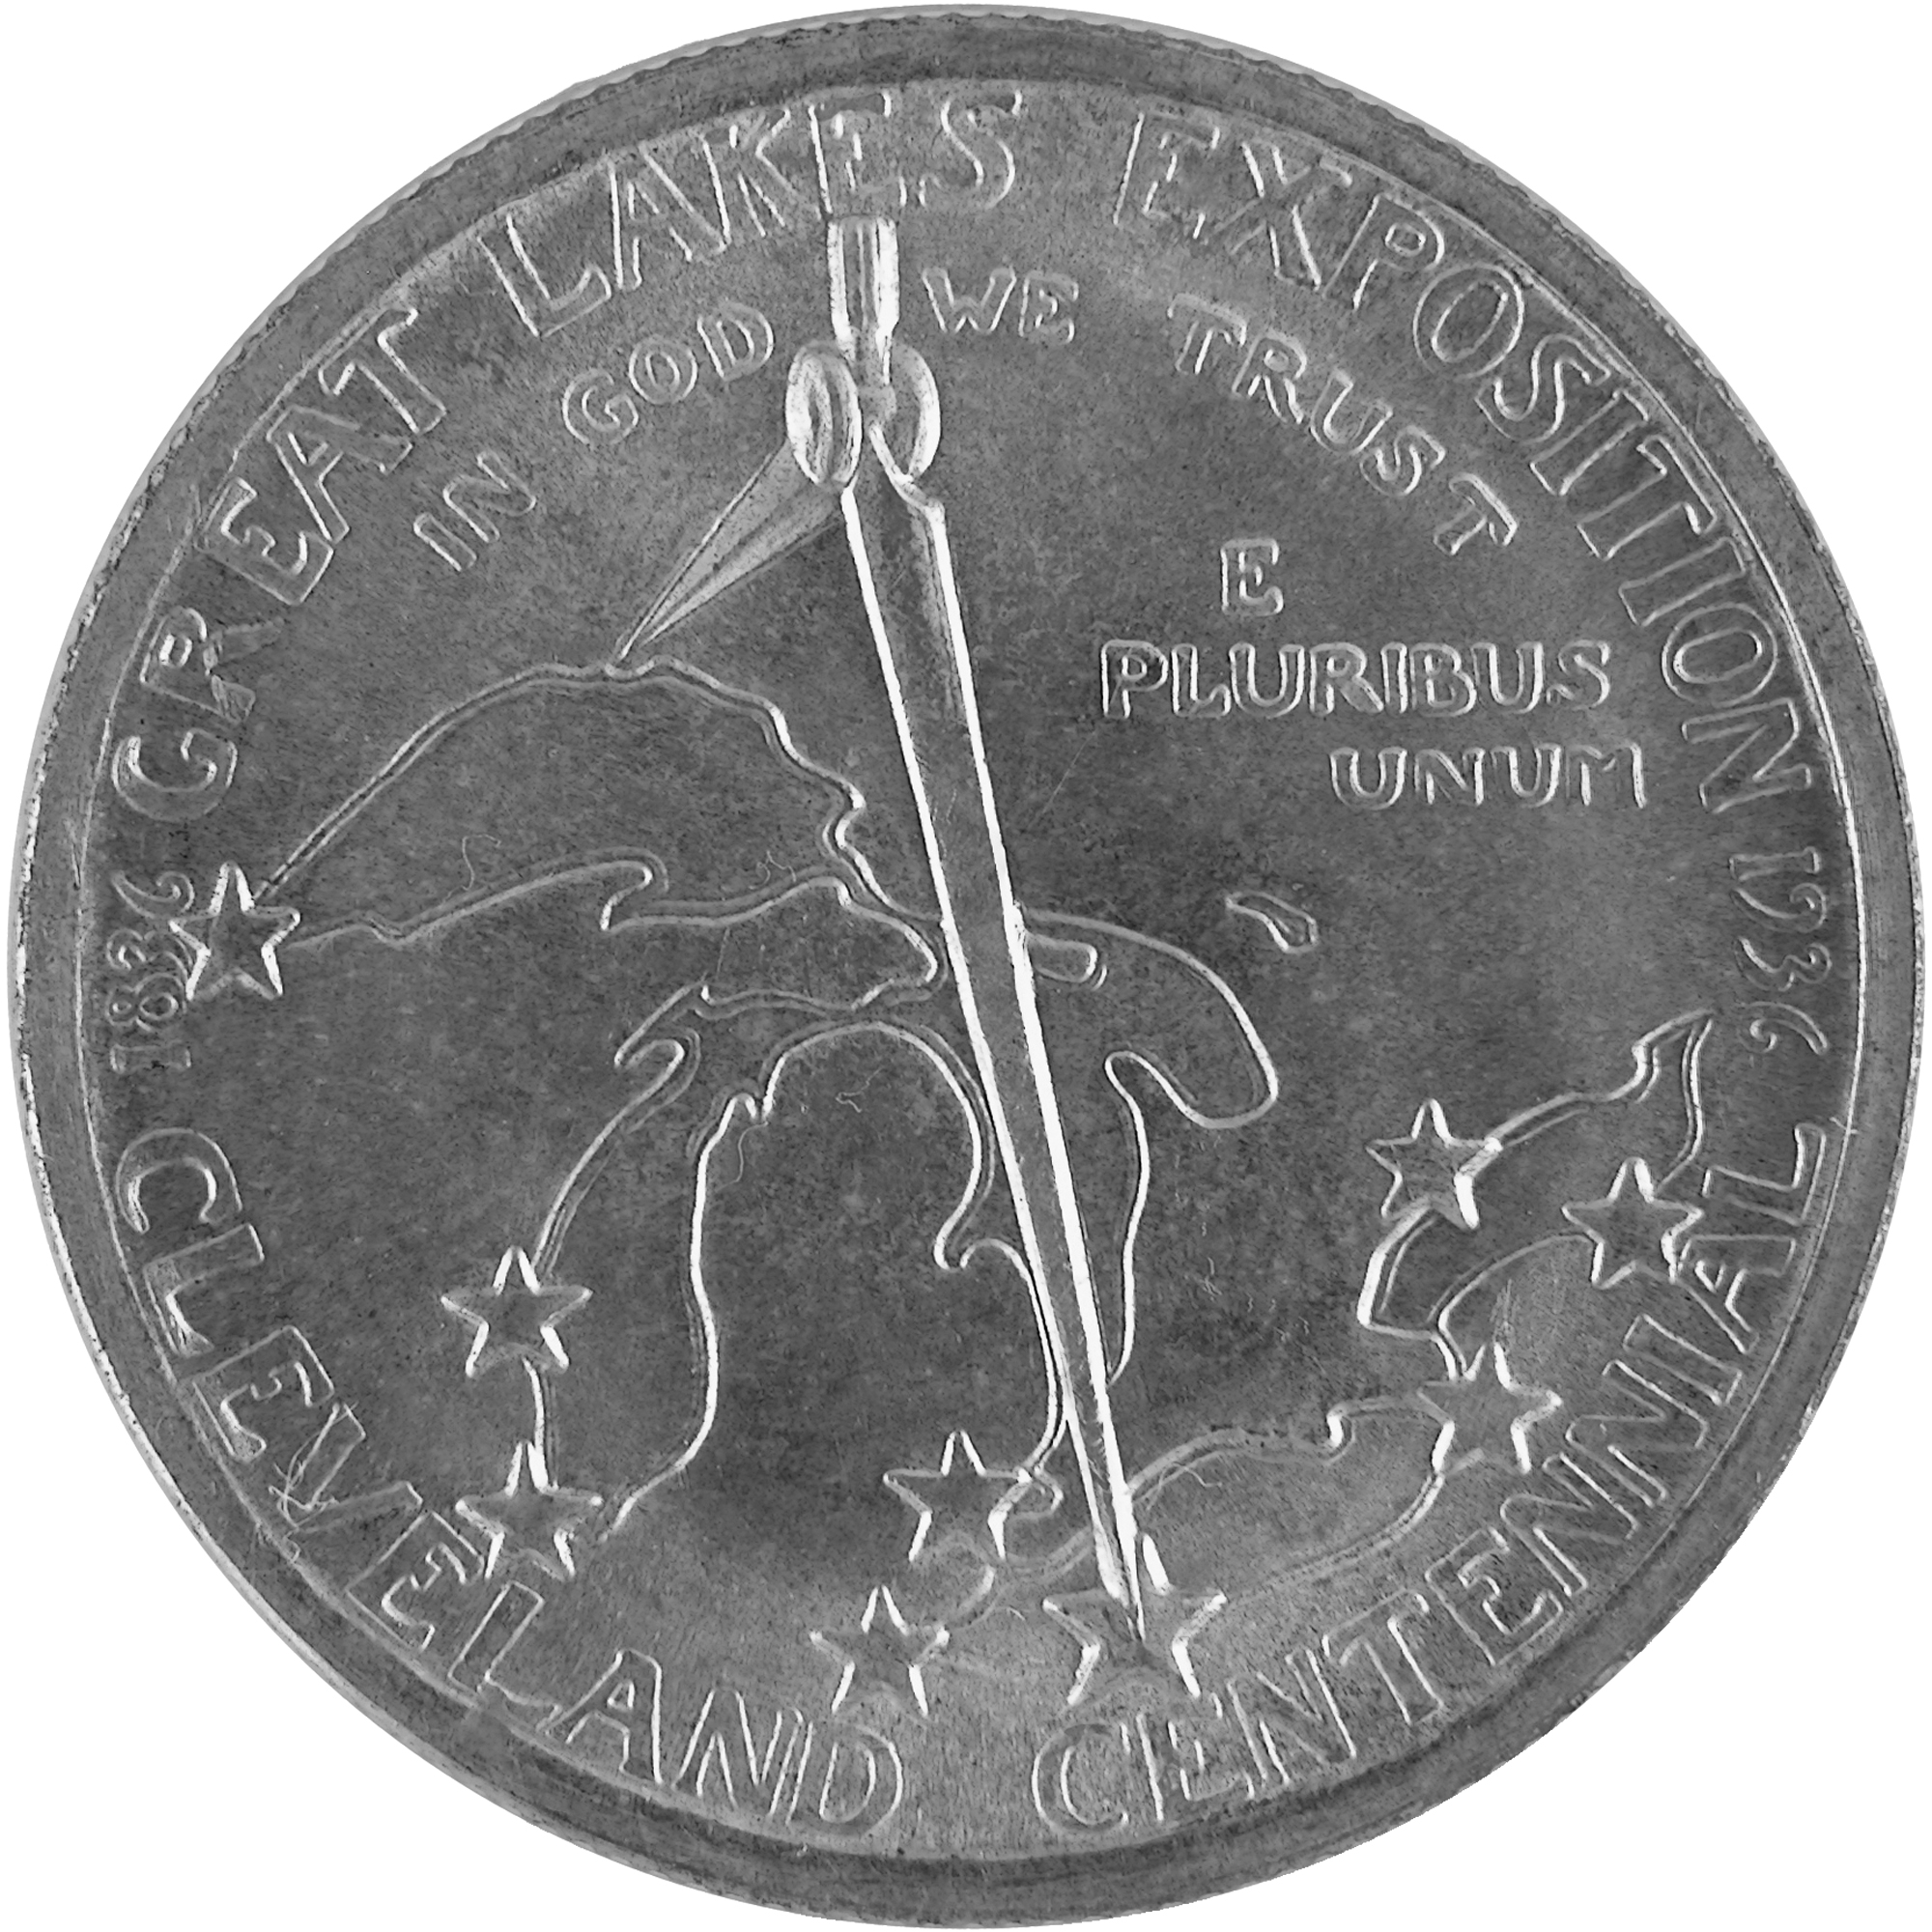 1936 Cleveland Great Lakes Exposition Commemorative Silver Half Dollar Coin Reverse